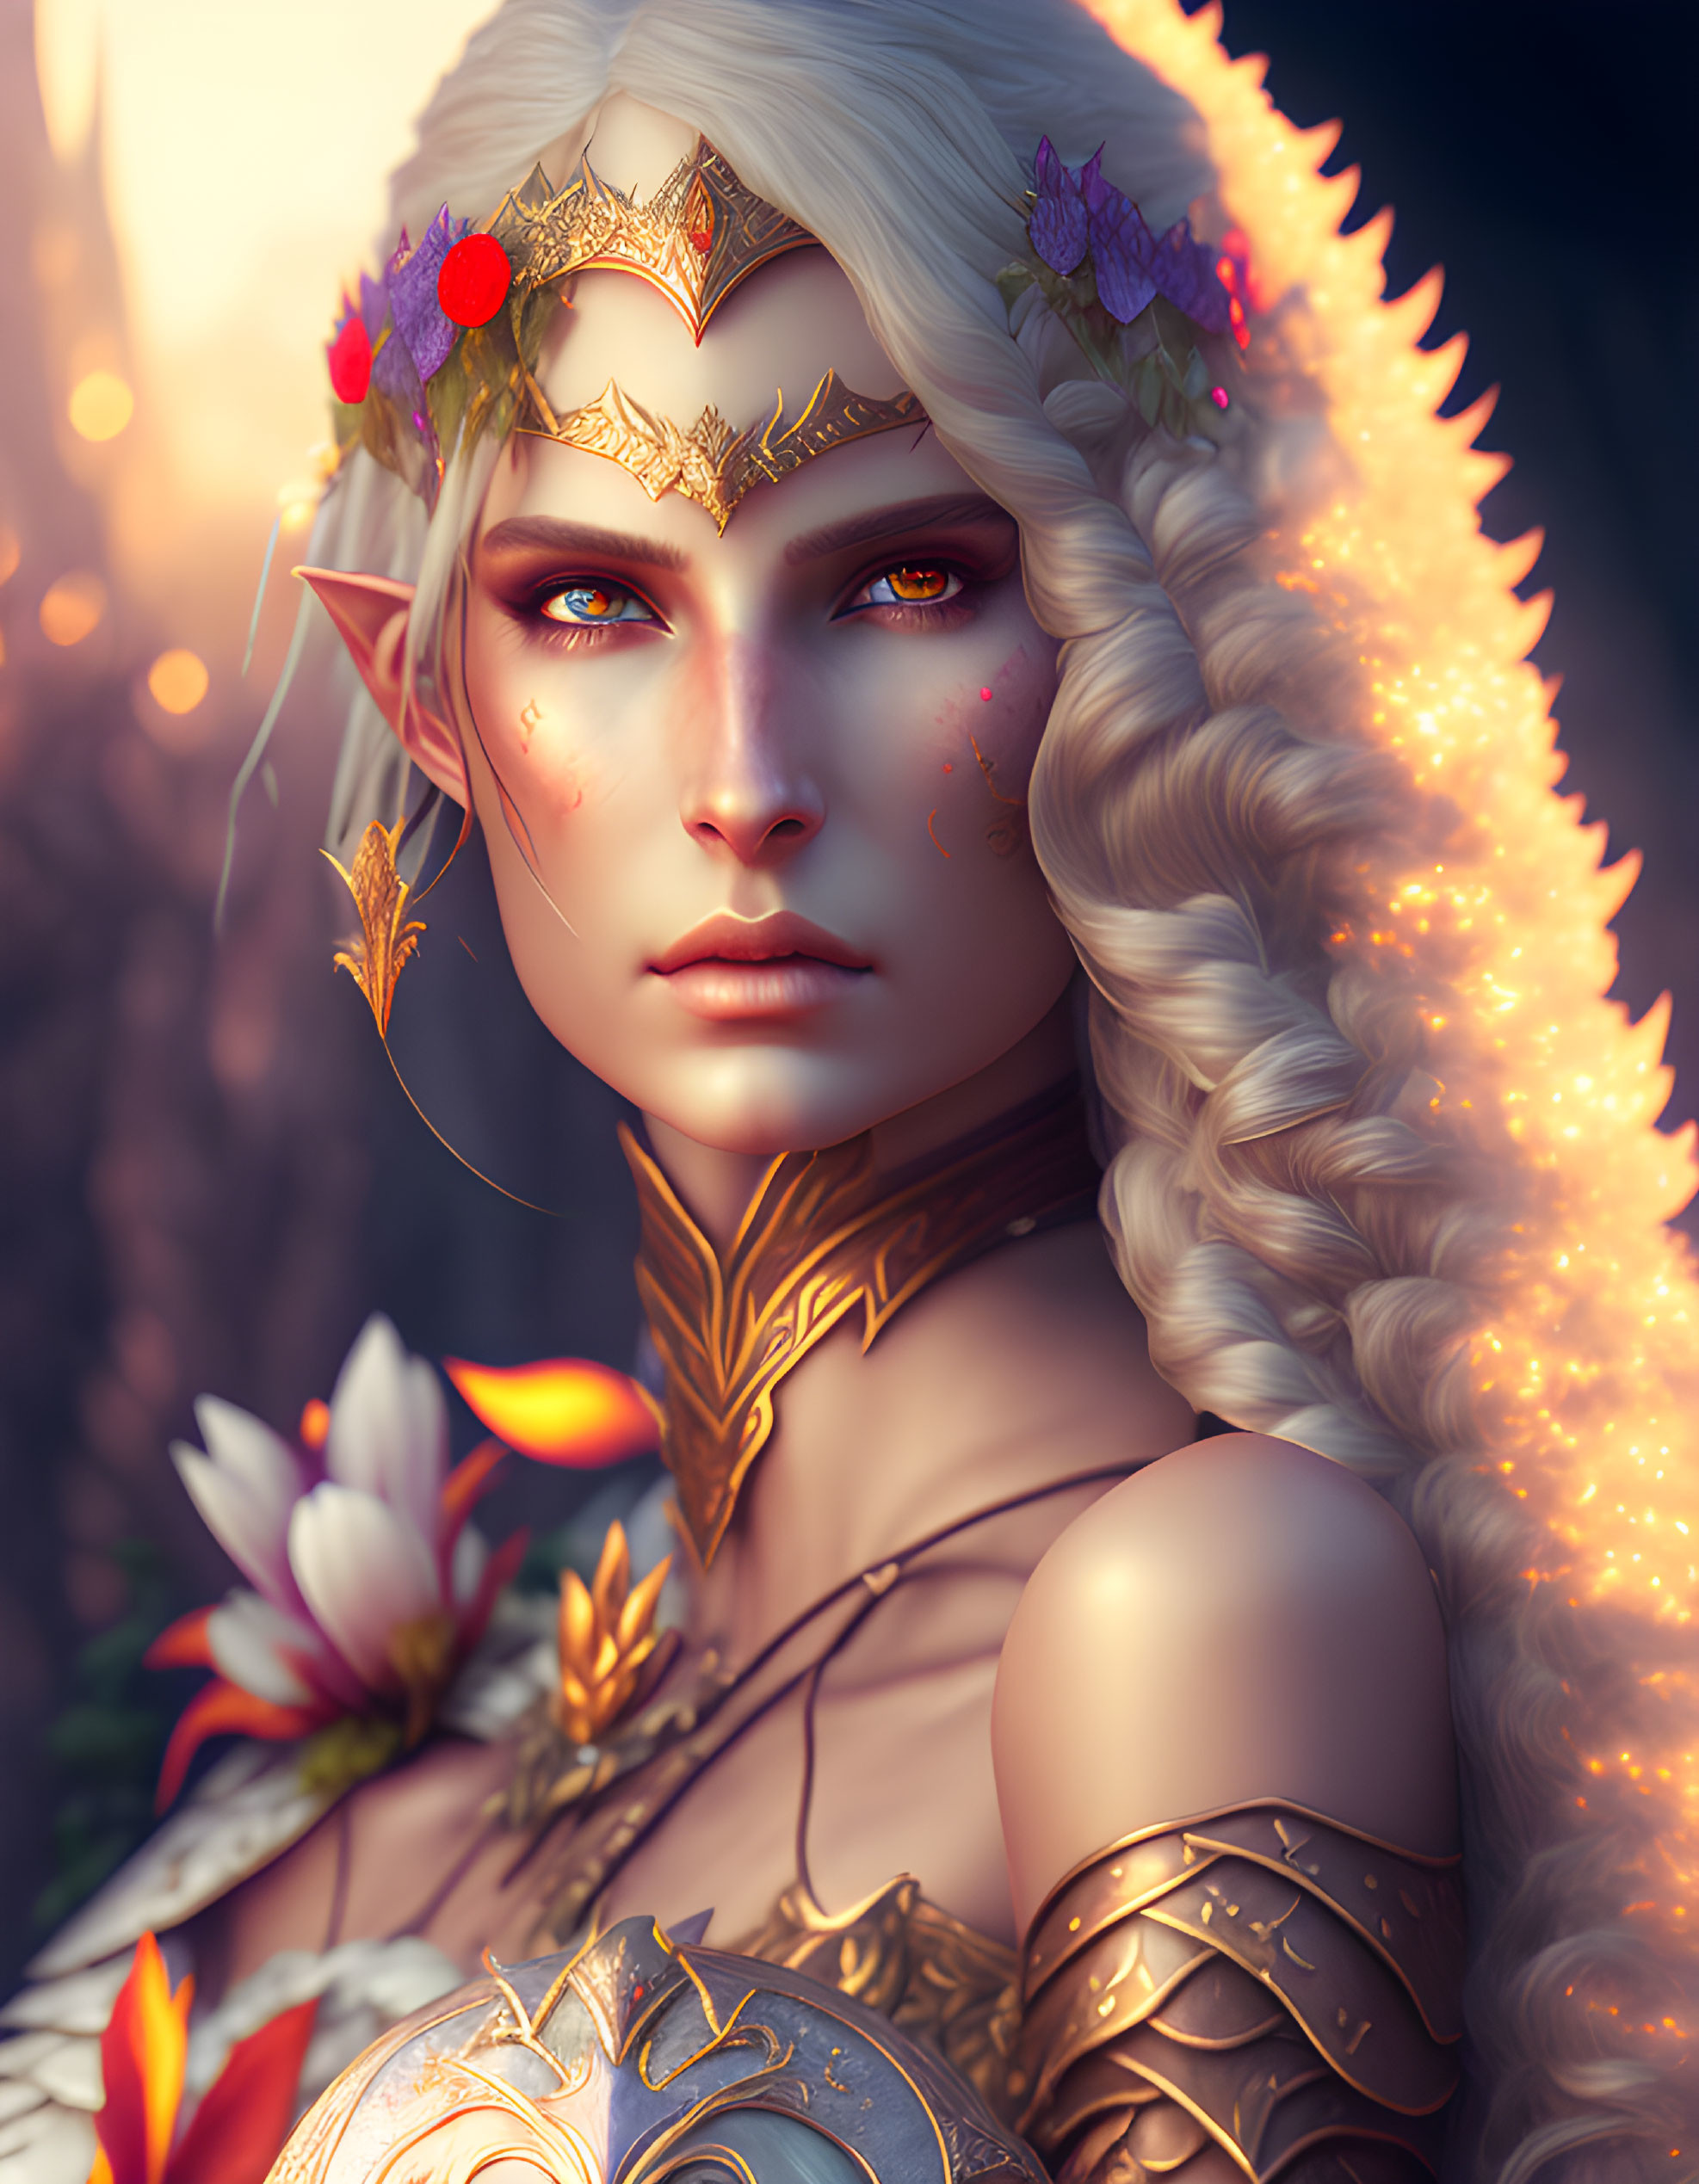 Fantasy elf portrait in golden armor, glowing hair, and floral adornments